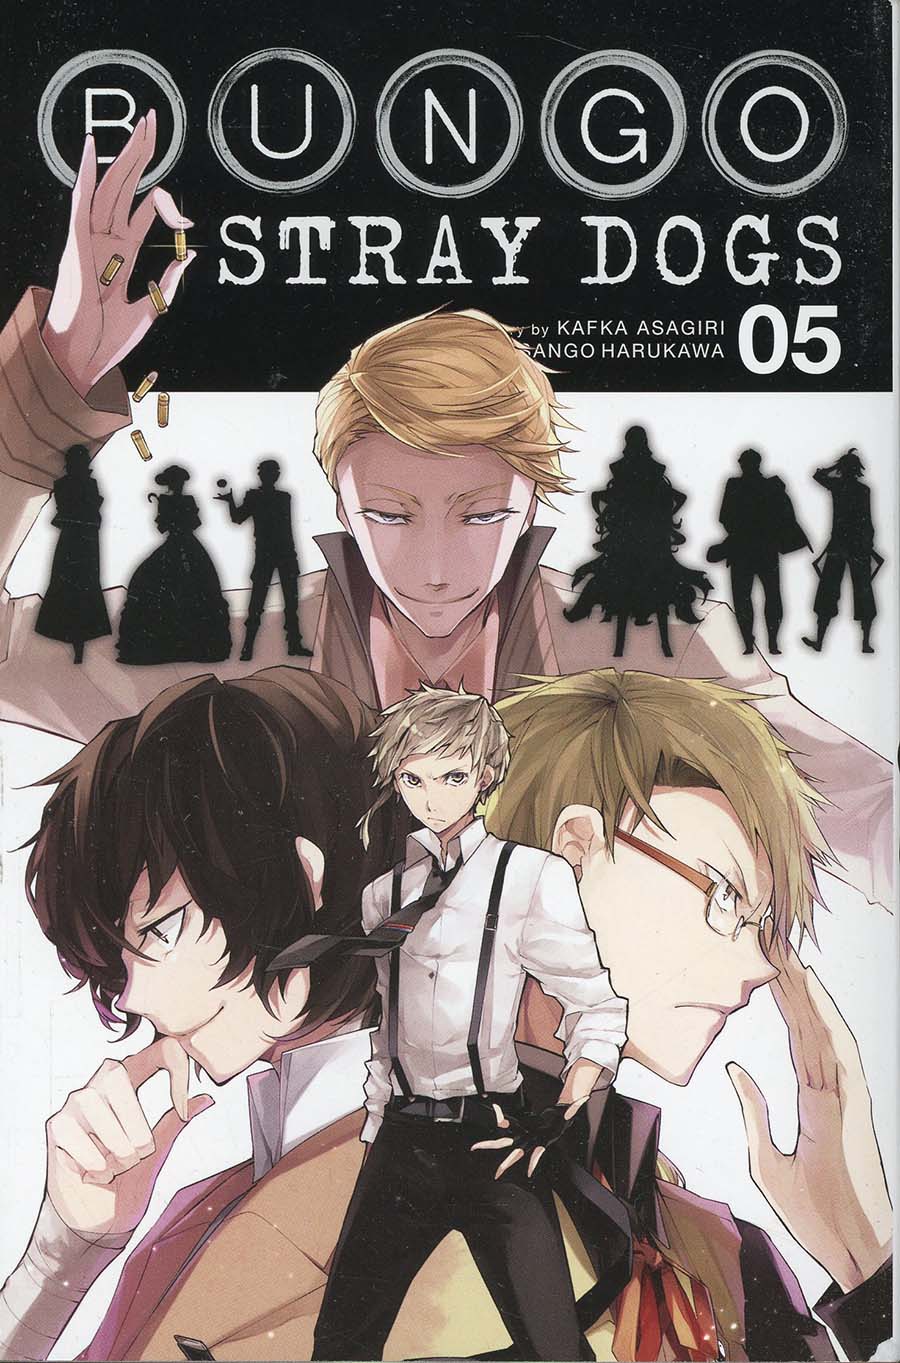 Bungo Stray Dogs Vol 5 GN